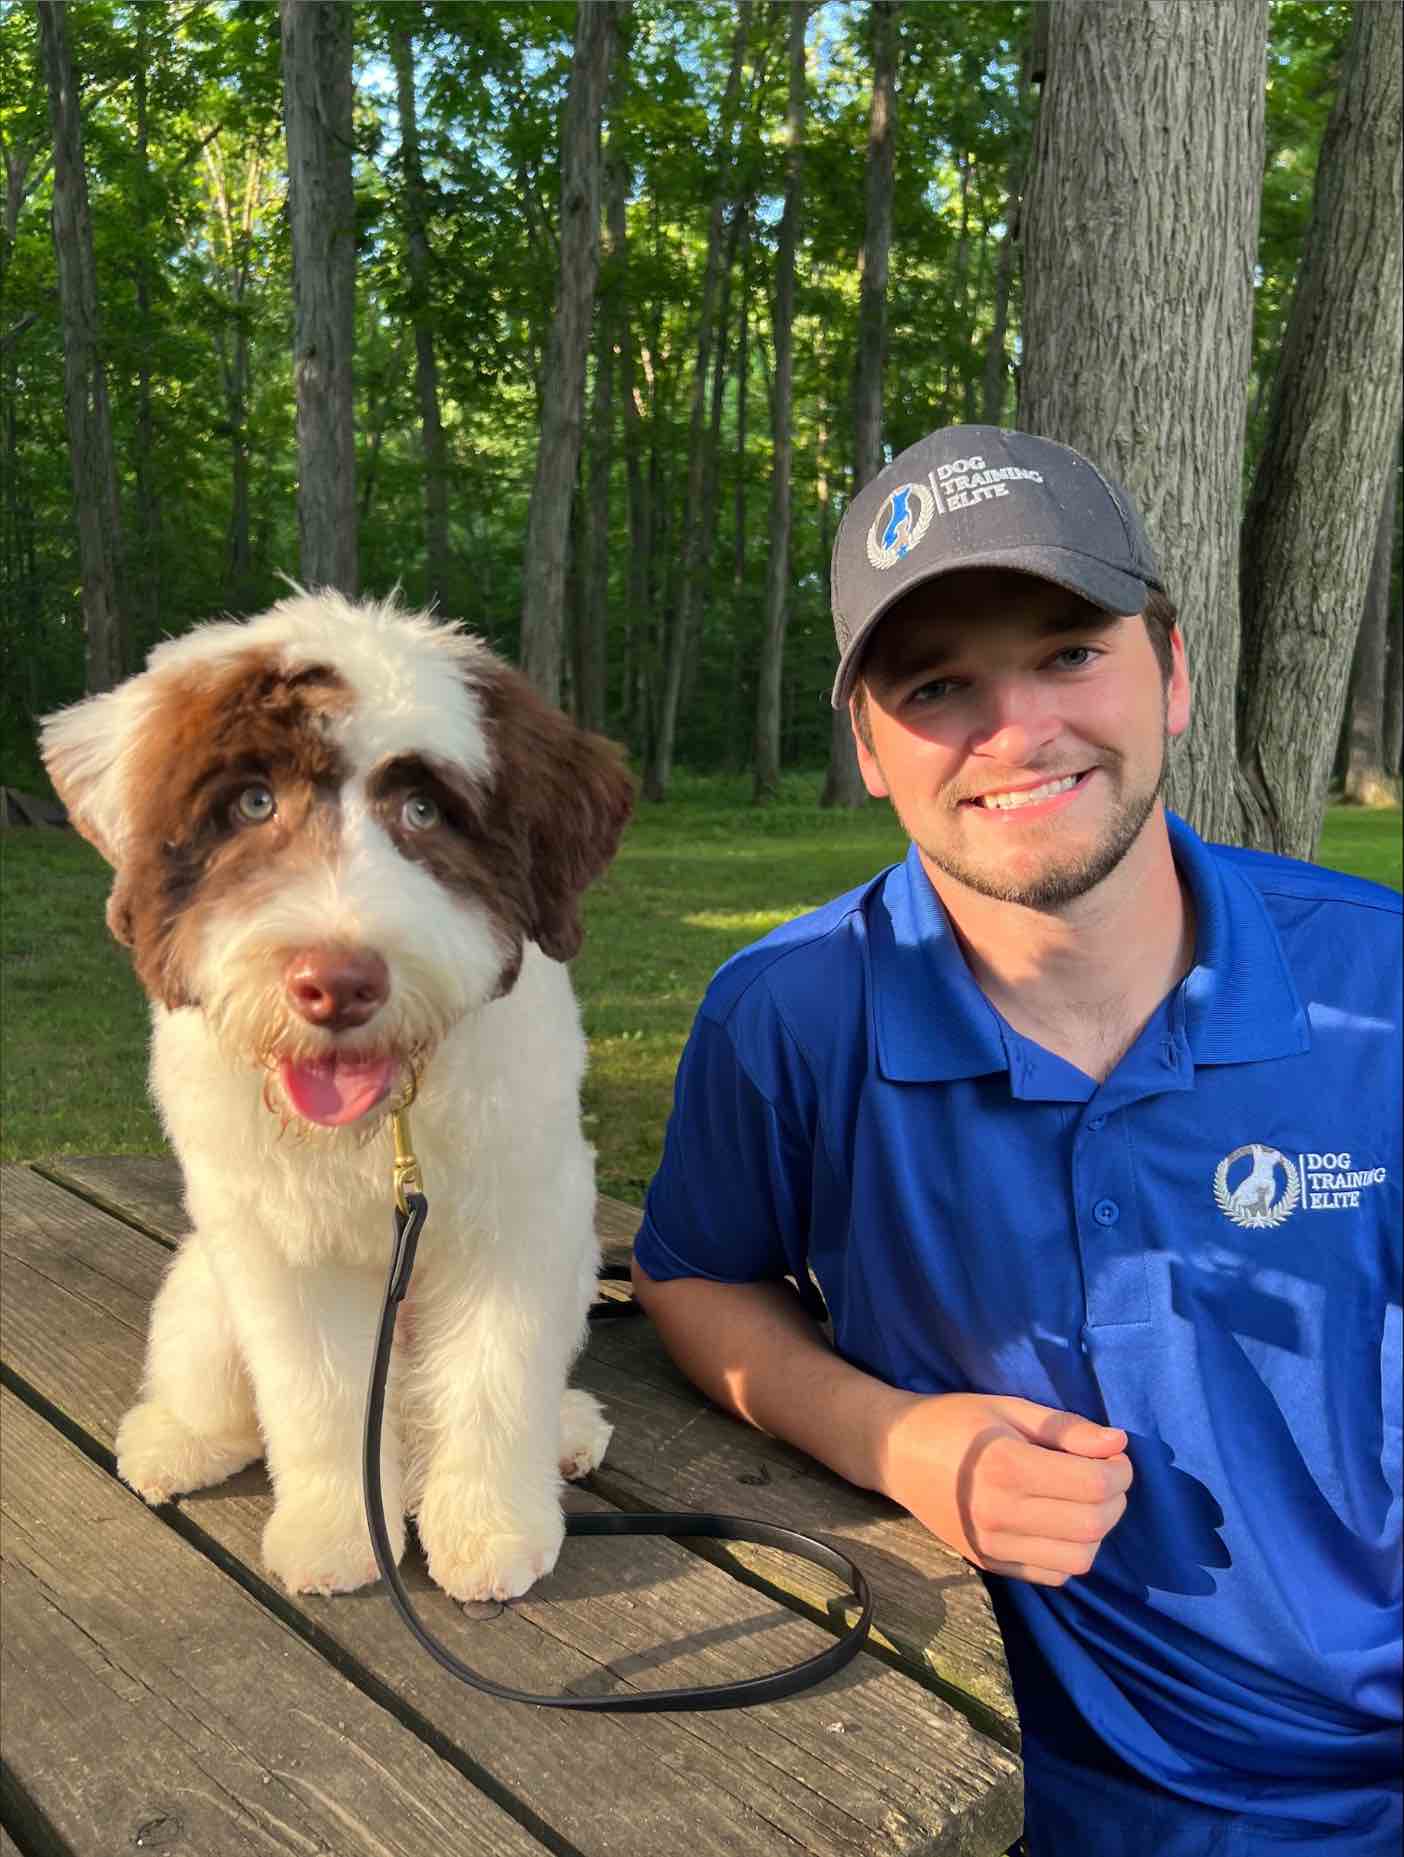 With training and support, you'll smile about Dog Training Elites work from home franchise just like this trainer and his pup!